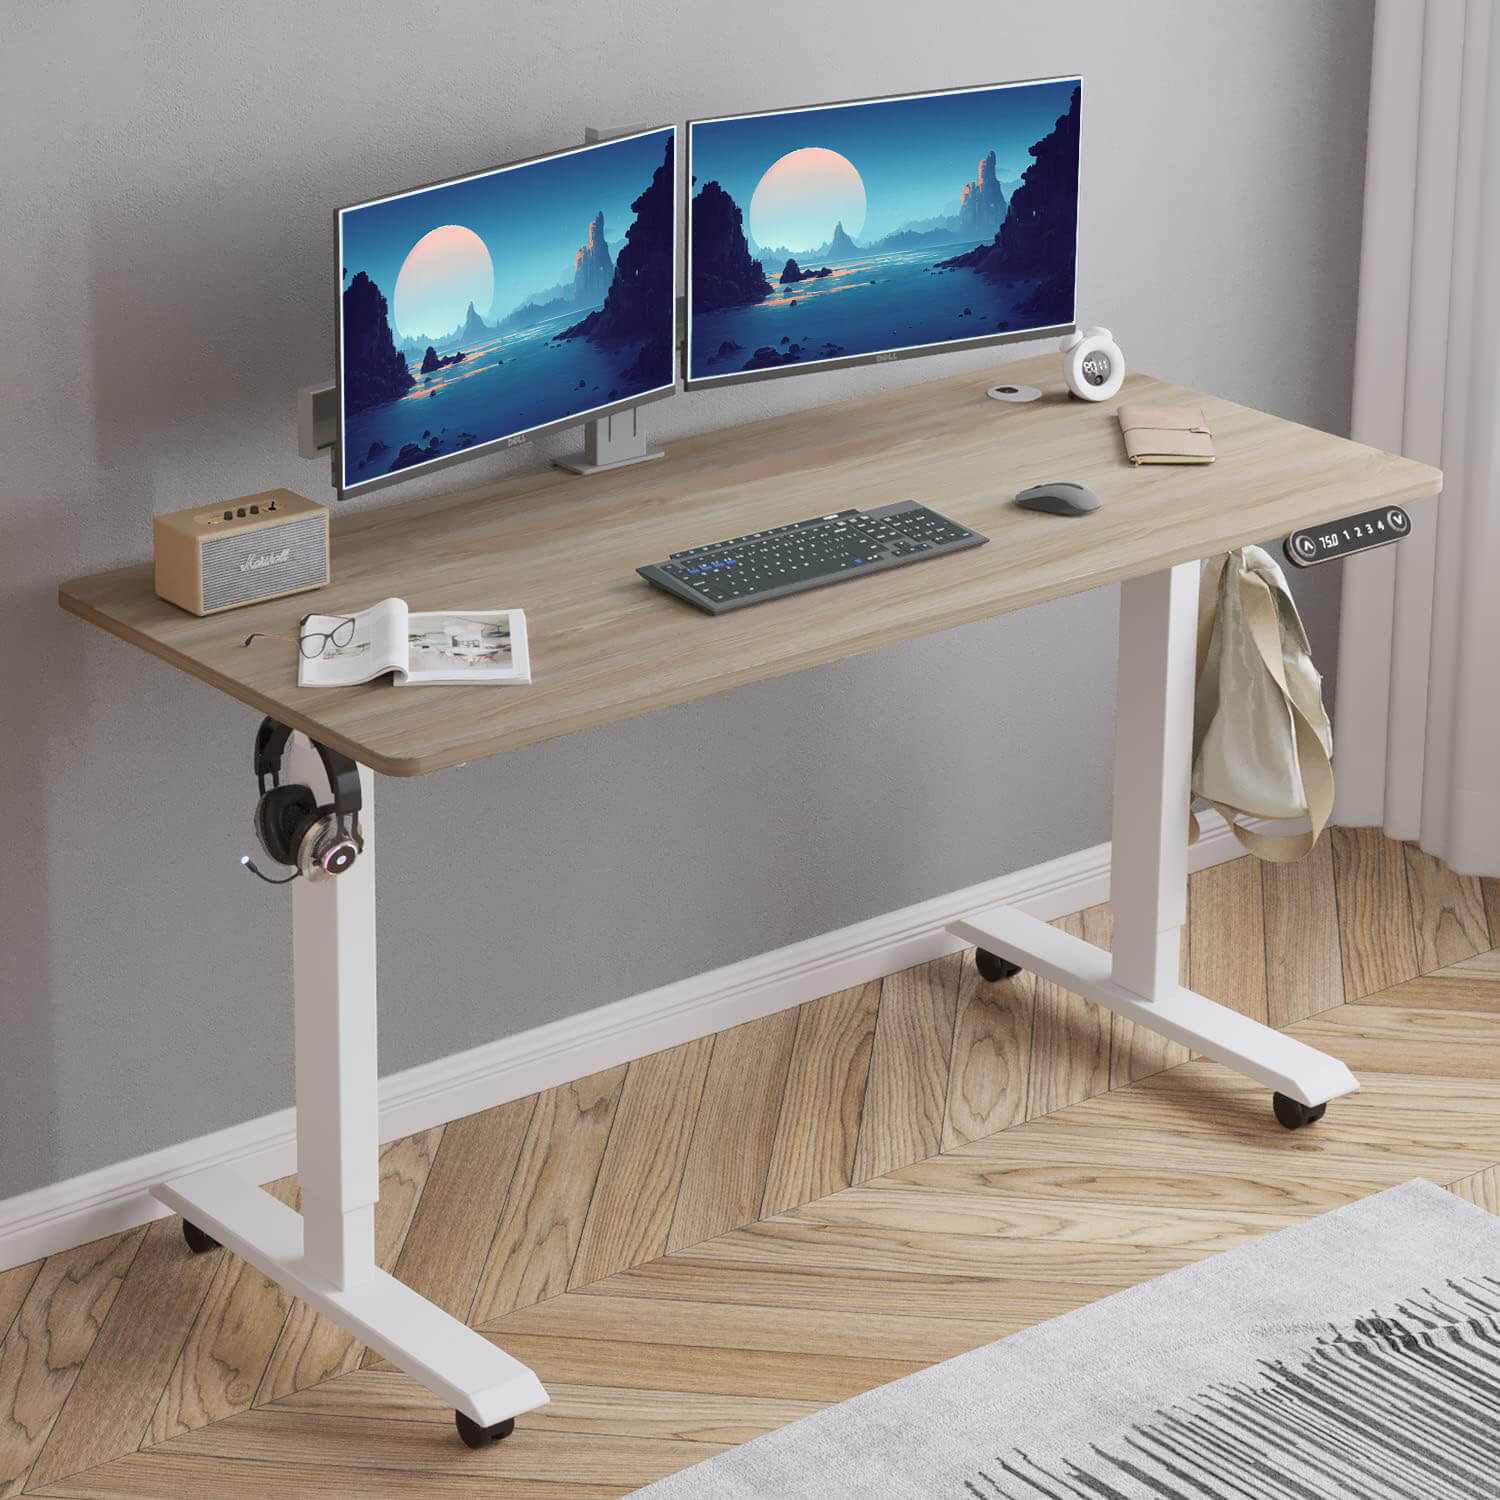 Deskohilo 48" x 24" Electric Standing Desks, Height Adjustable Office Tables with Splice Board and A Under Desk Cable Management Tray with Wheels, Brown or Oak